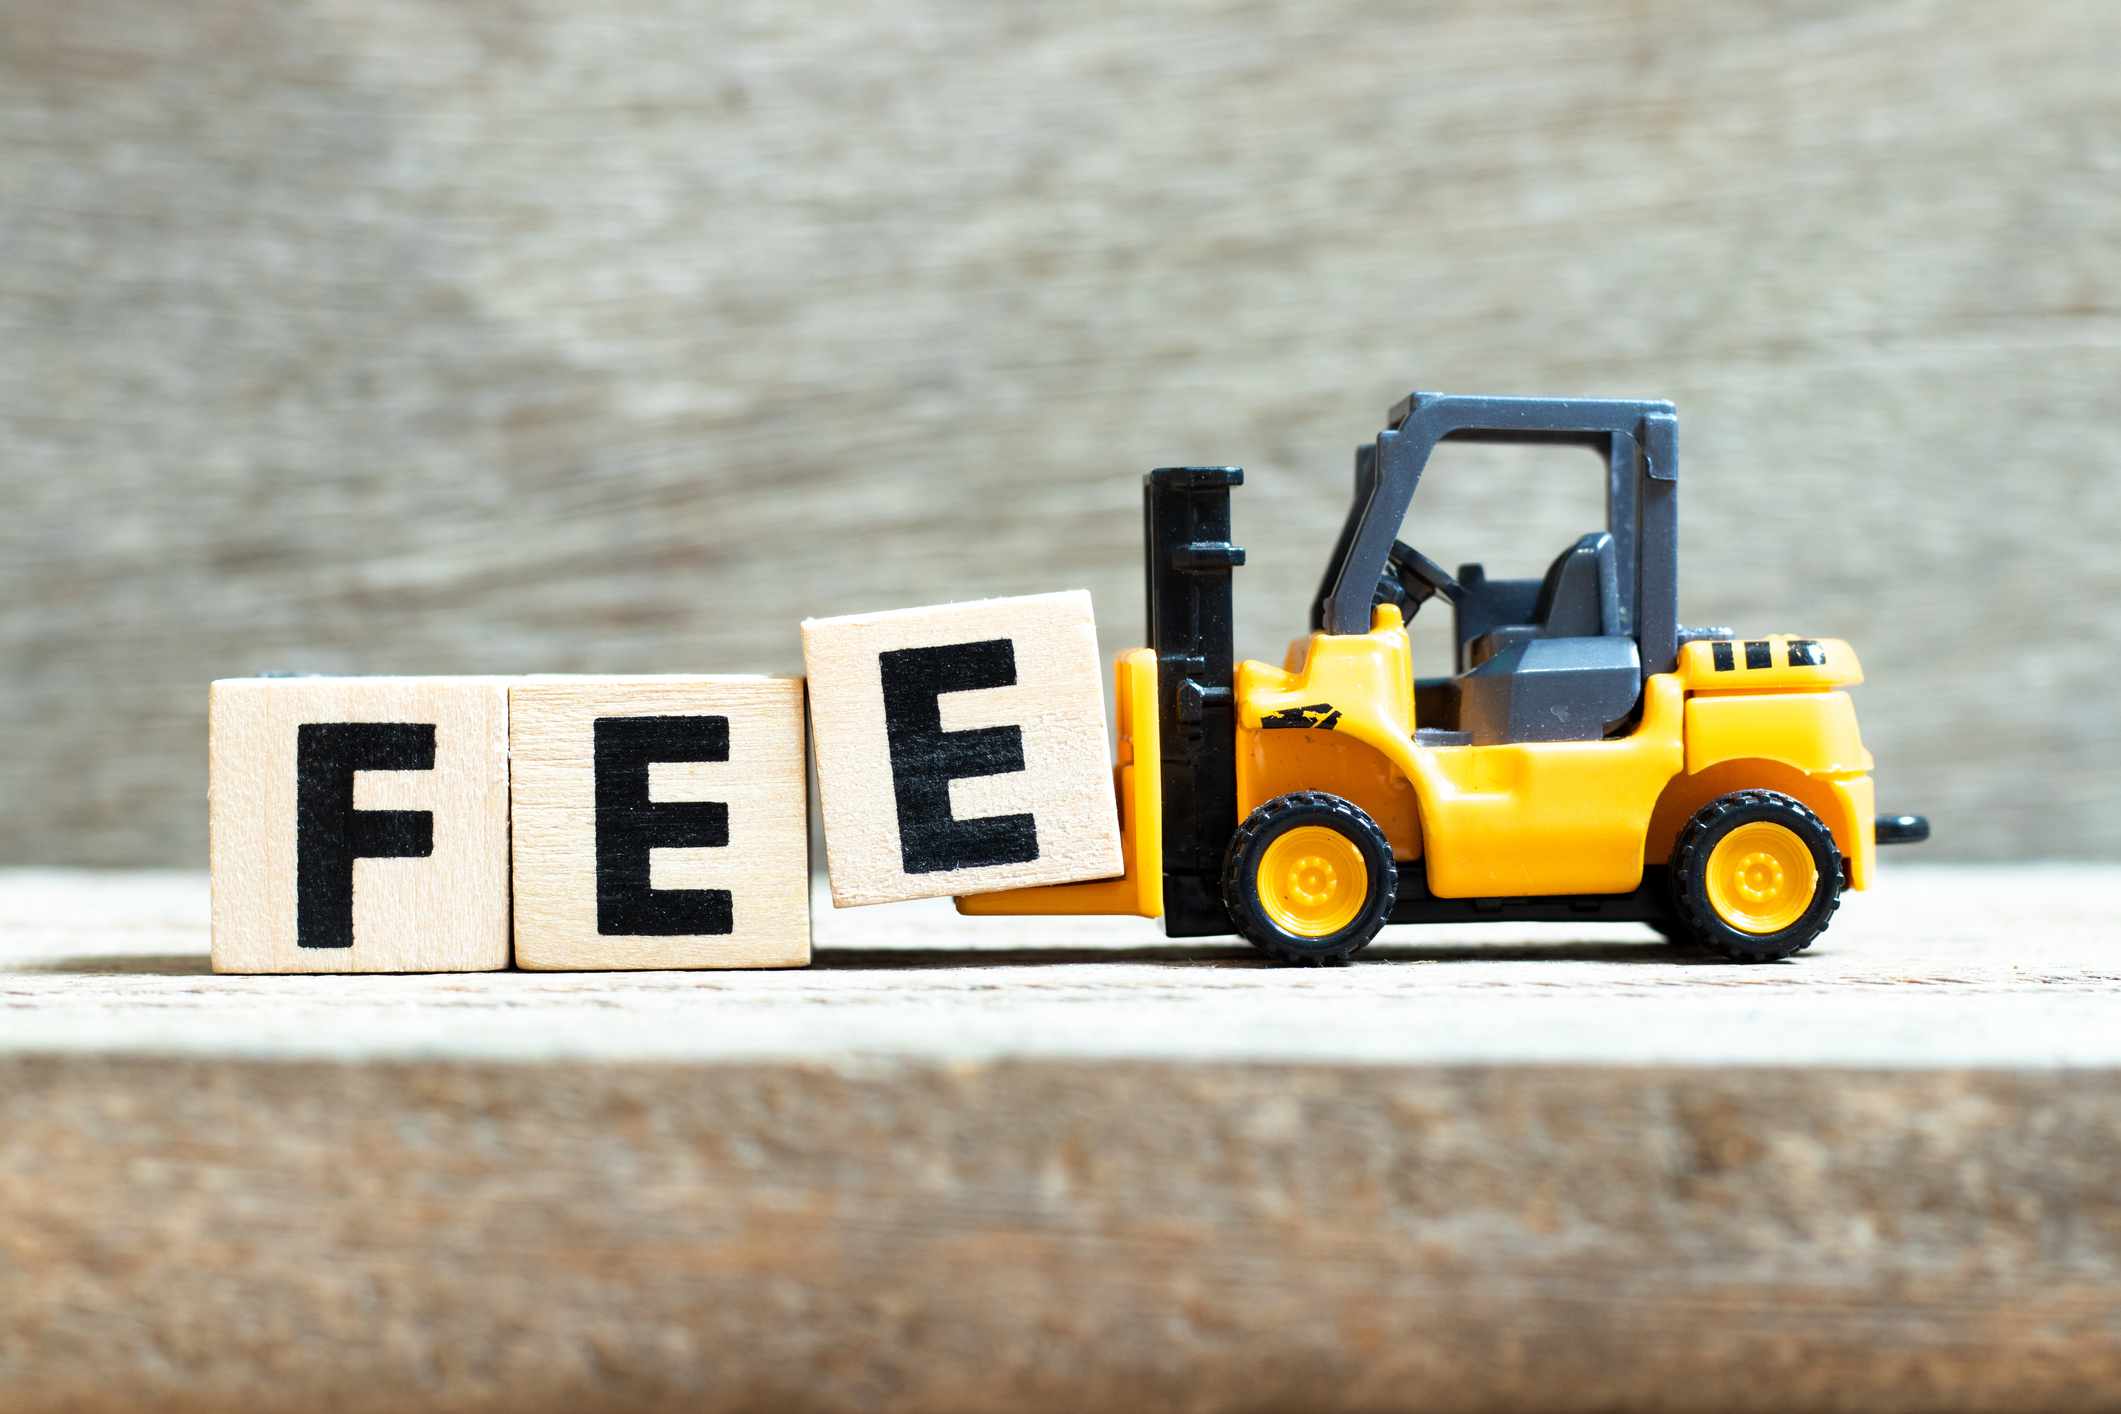 Toy forklift hold letter block e to complete word fee on wood background